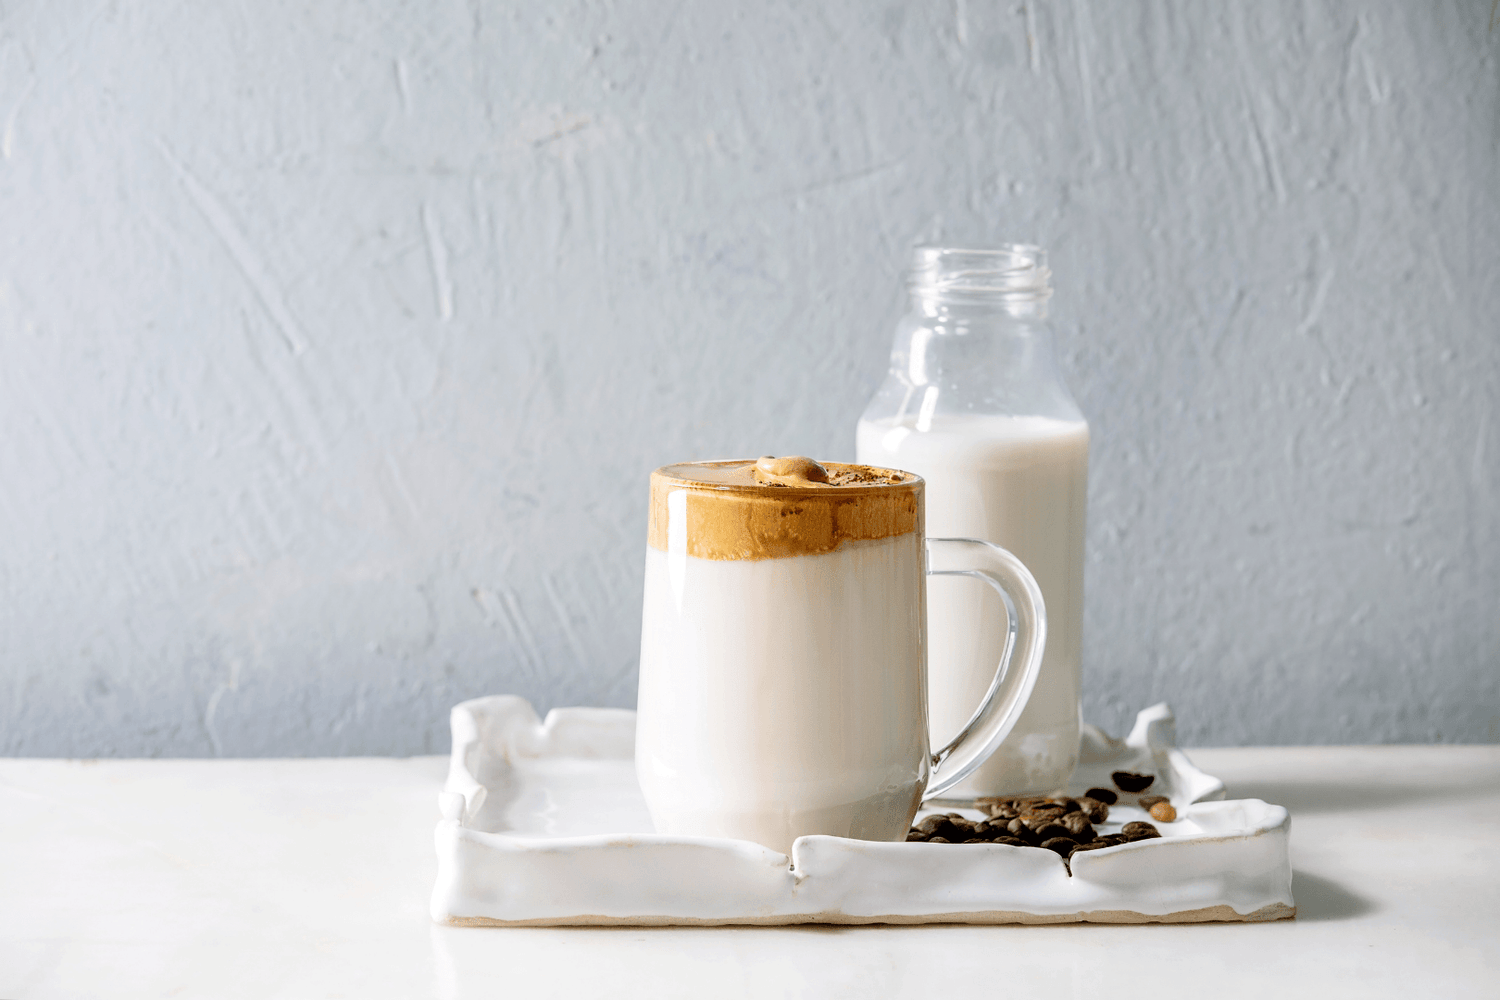 How to froth oat milk at home - MilkFrother Guide